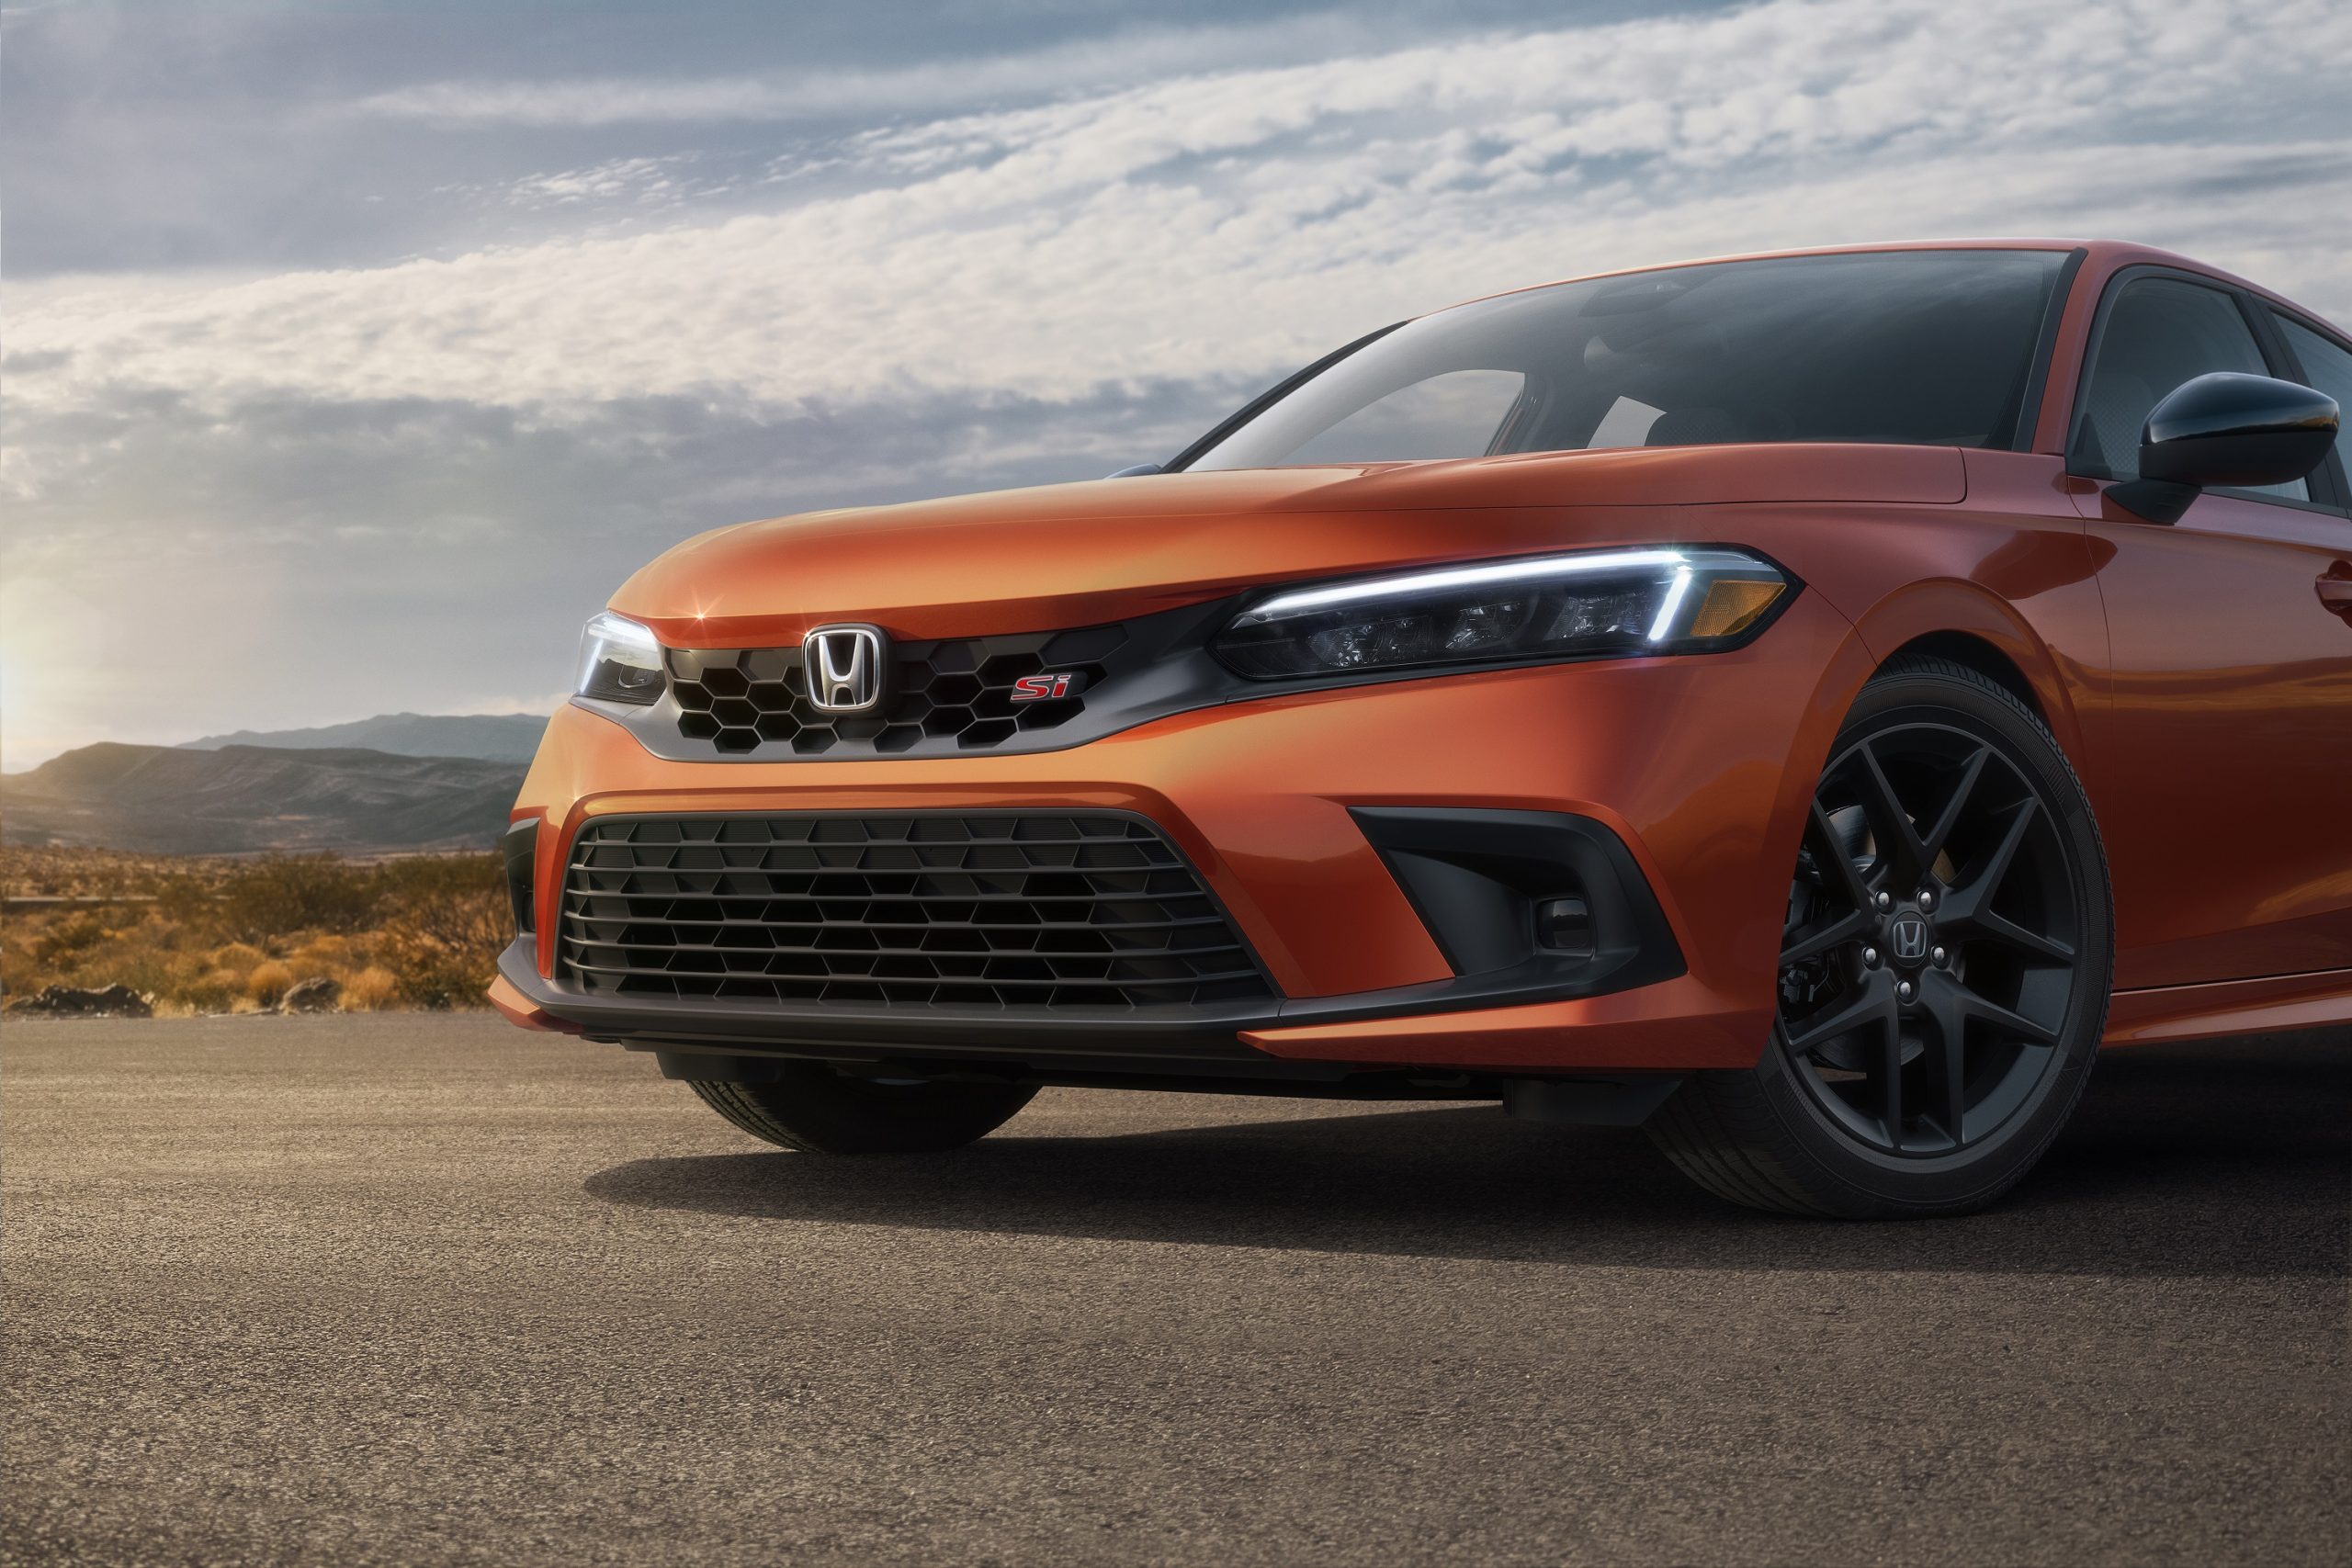 The front end of the 2022 Honda Civic Si in orange